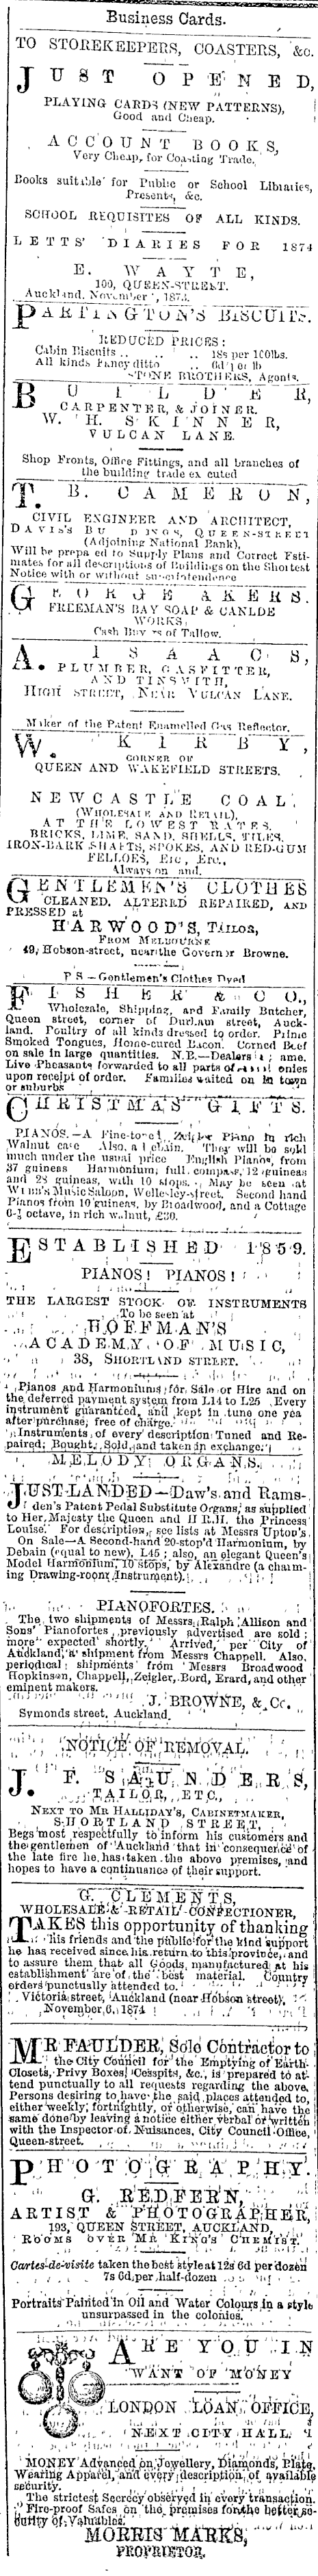 Papers Past Newspapers Auckland Star 3 December 1873 Page 1 Advertisements Column 3